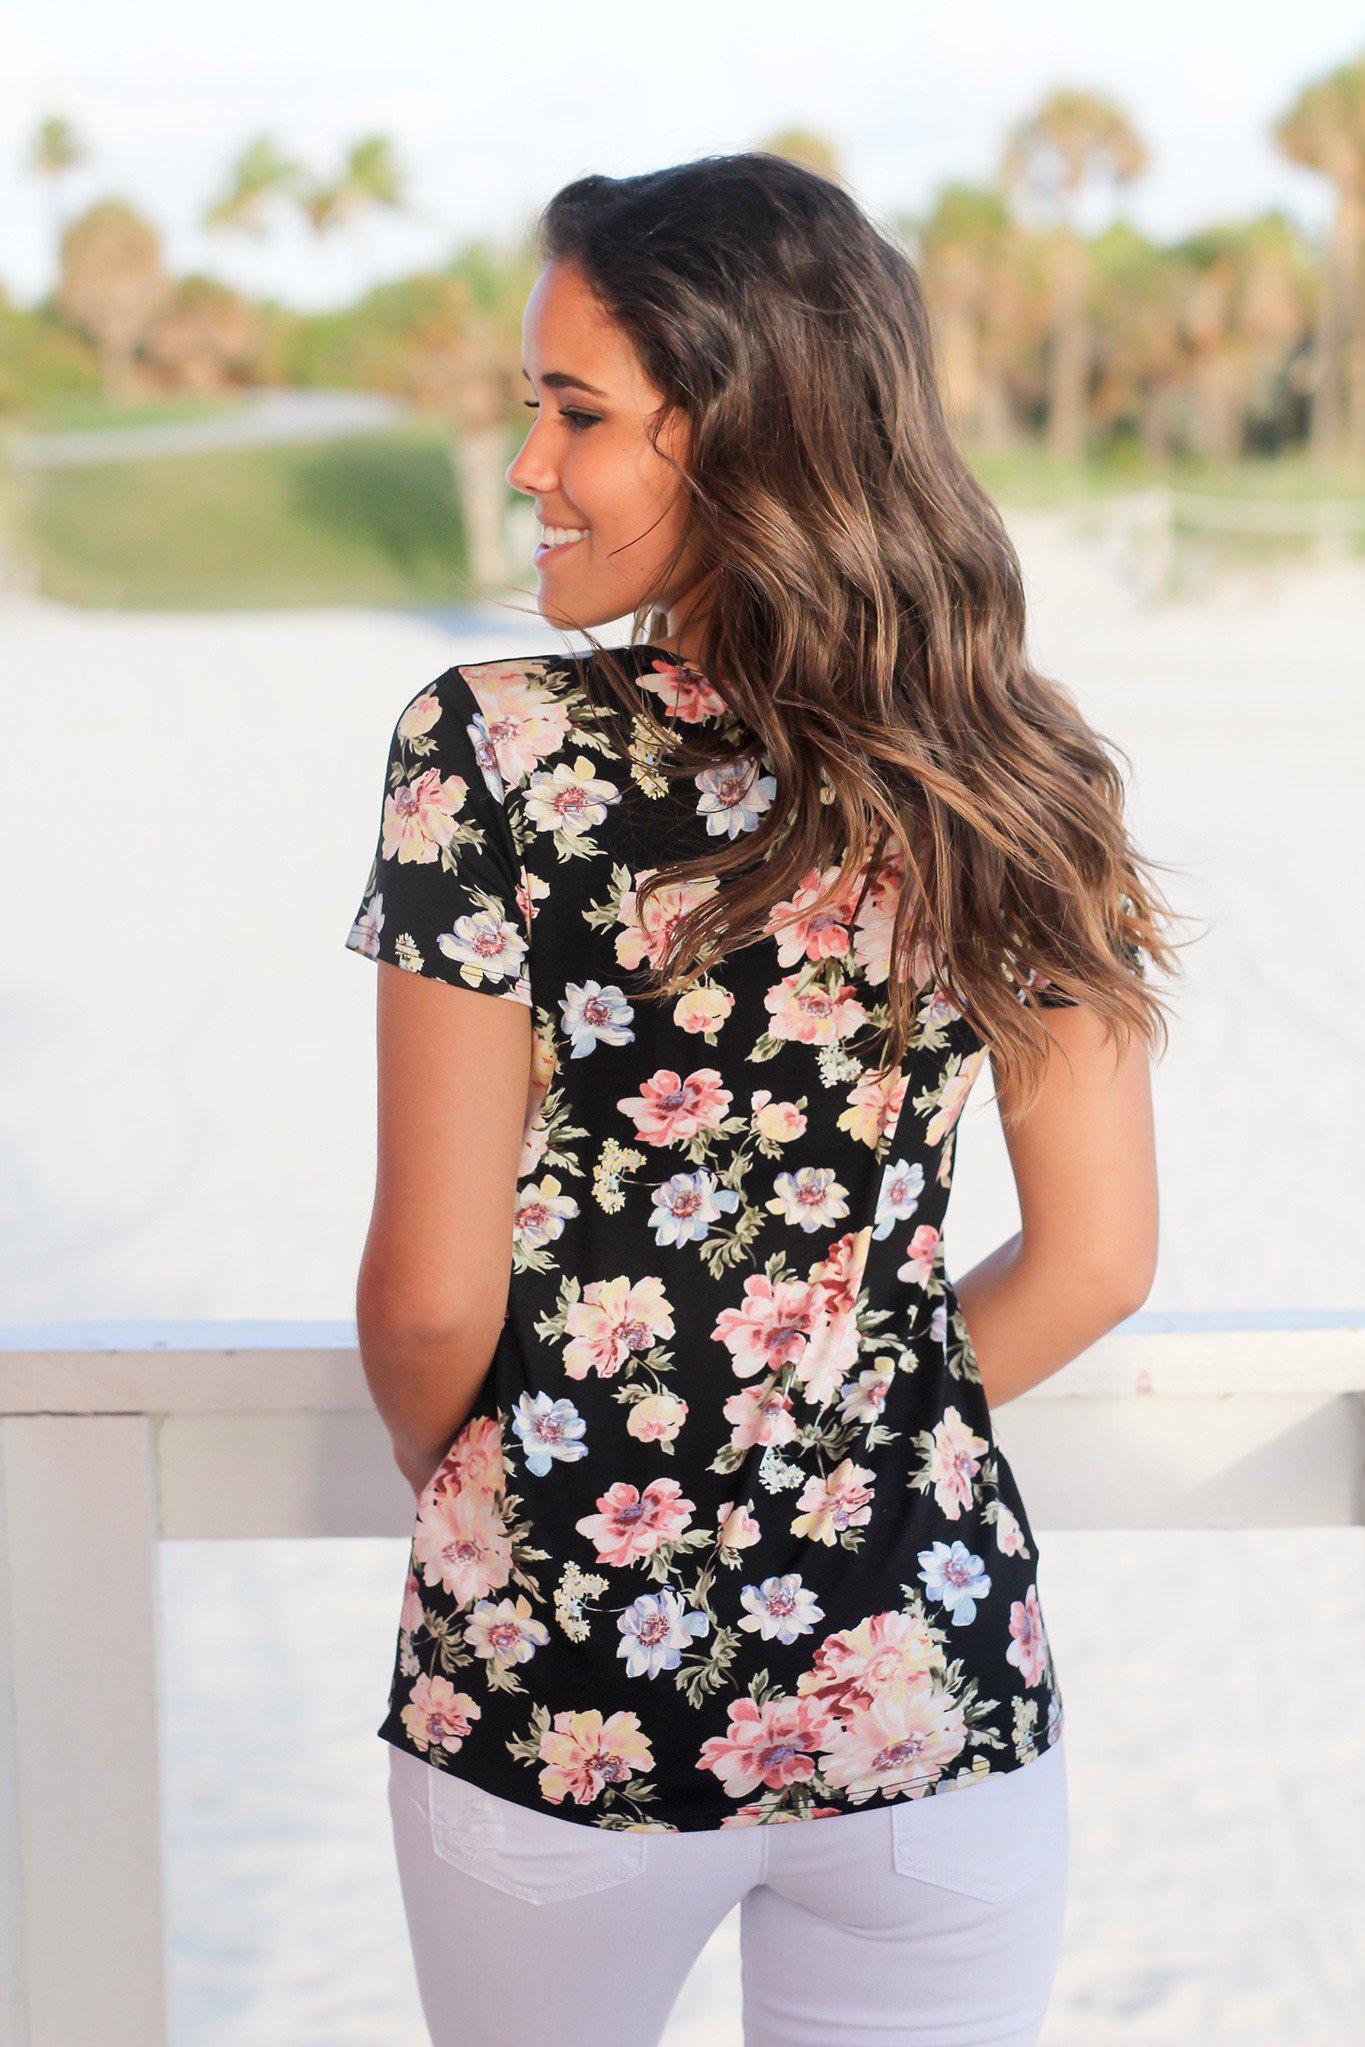 Black Floral Criss Cross Top with Short Sleeves